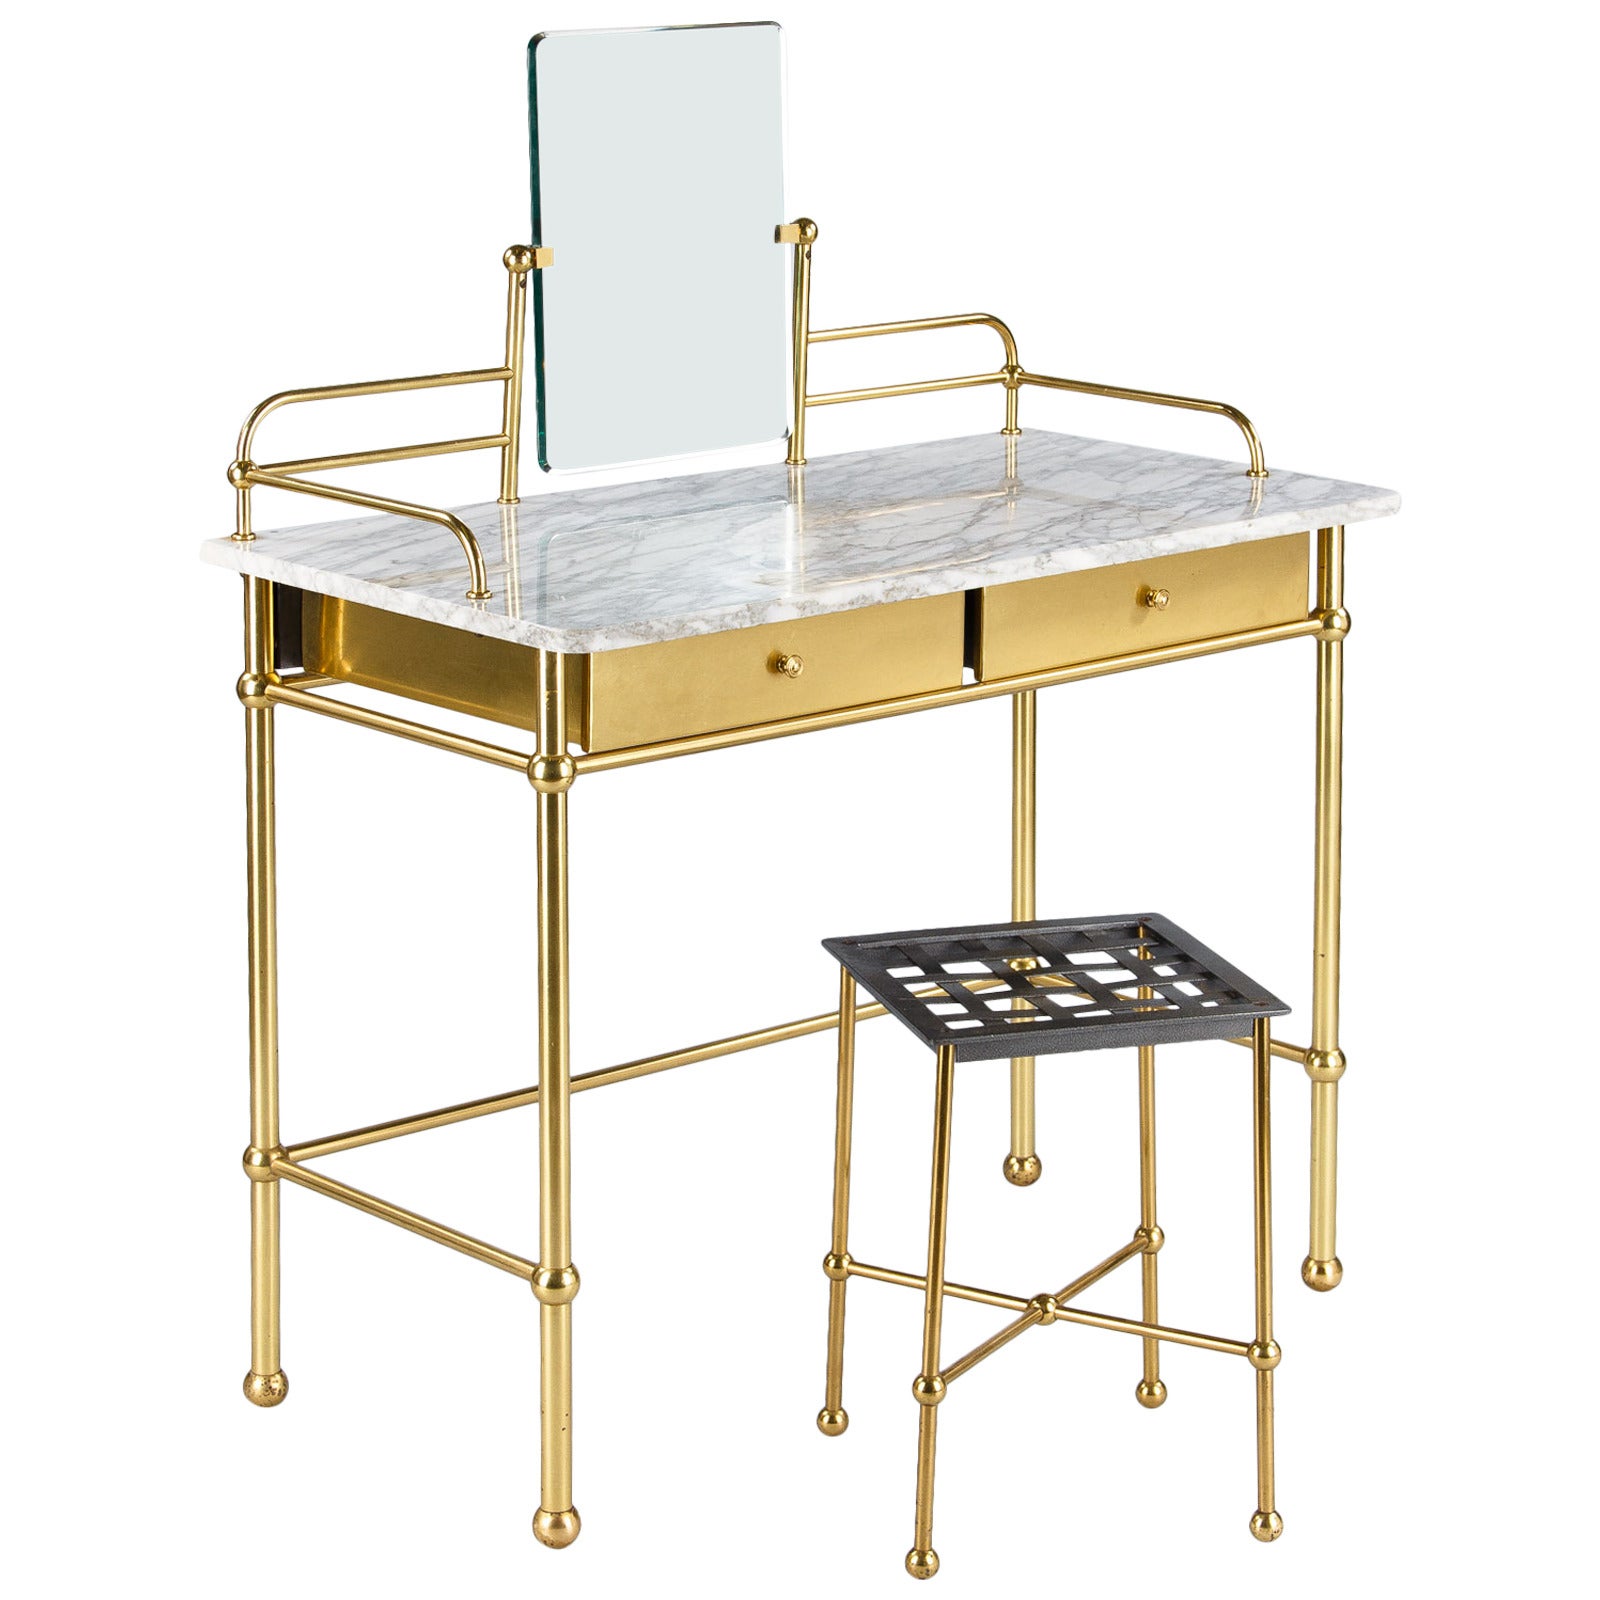 Vintage French Brass and Marble Vanity Table with Stool by Resistub, 1960s